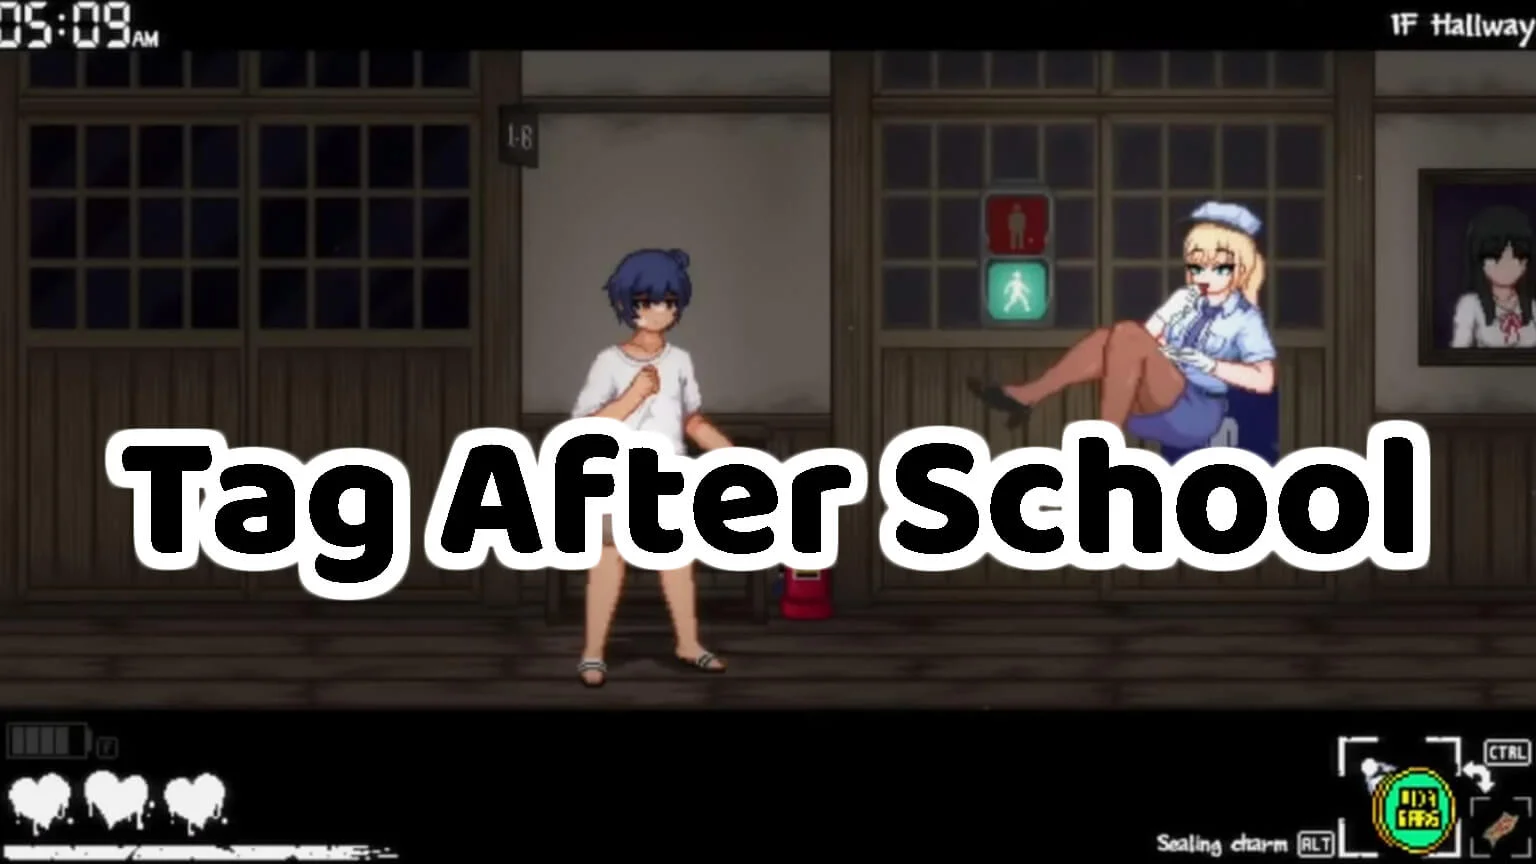 Tag After School Mod Apk Unlocked everything